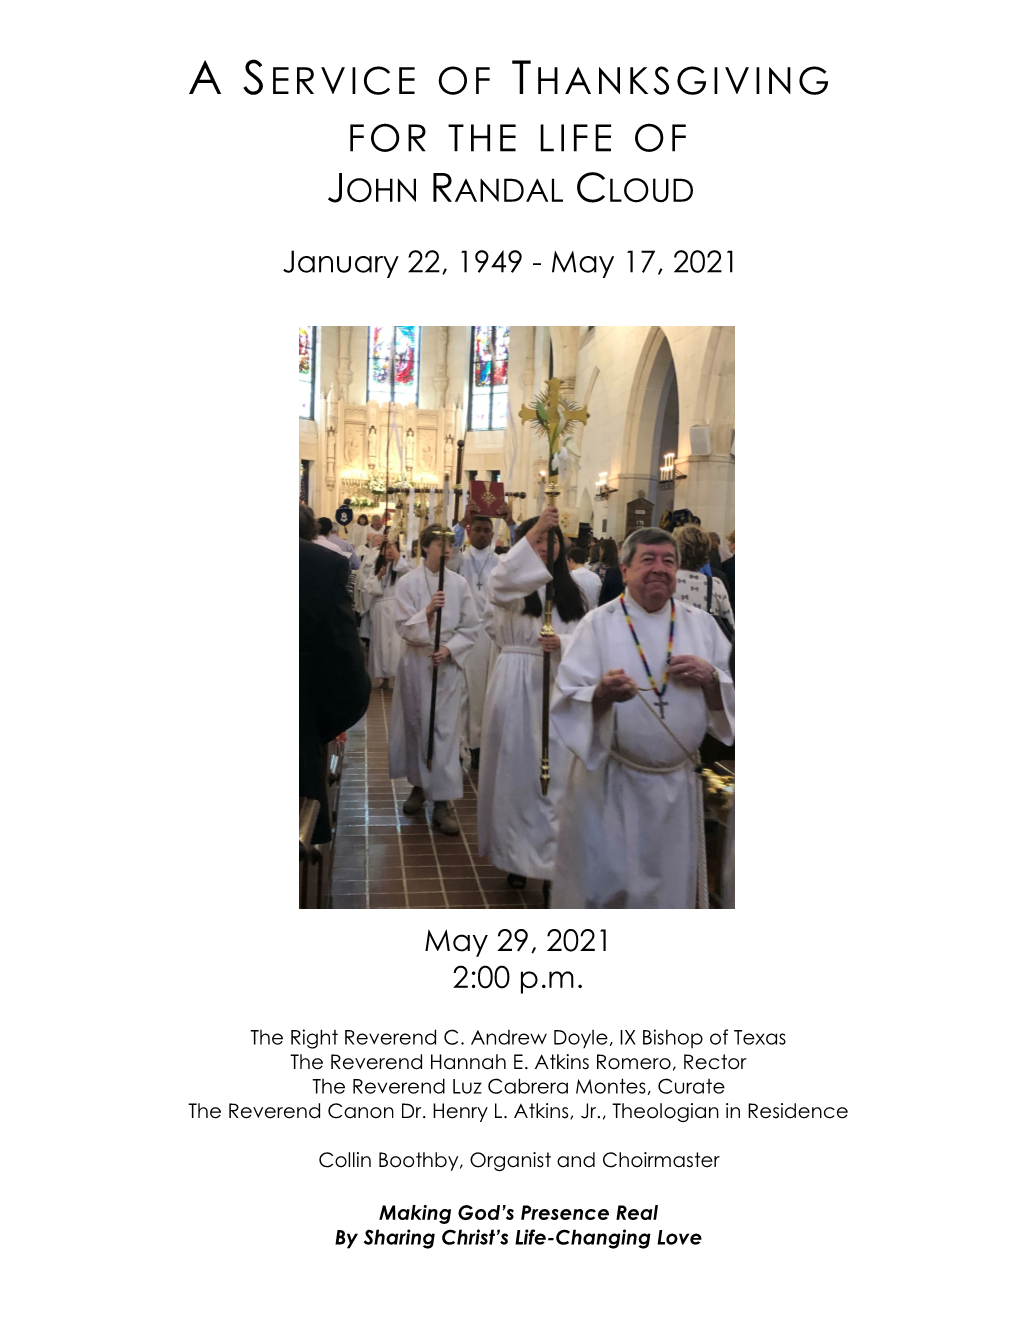 A Service of Thanksgiving for the Life of John Randal Cloud